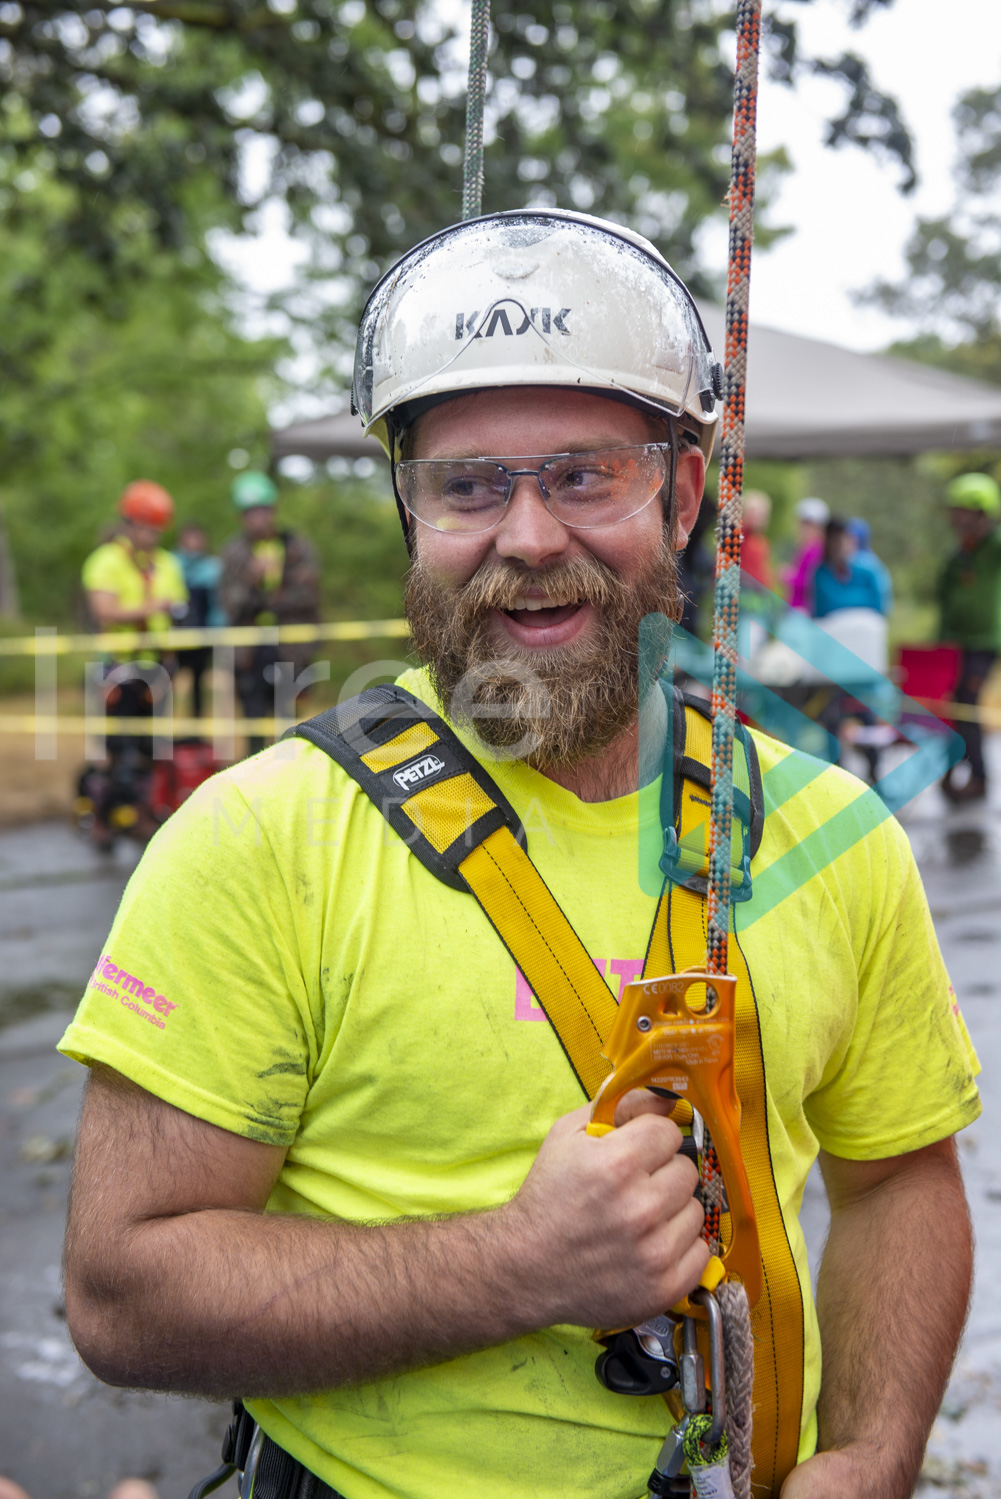 Male climbing arborist with big smile on his face ready to climb a rope